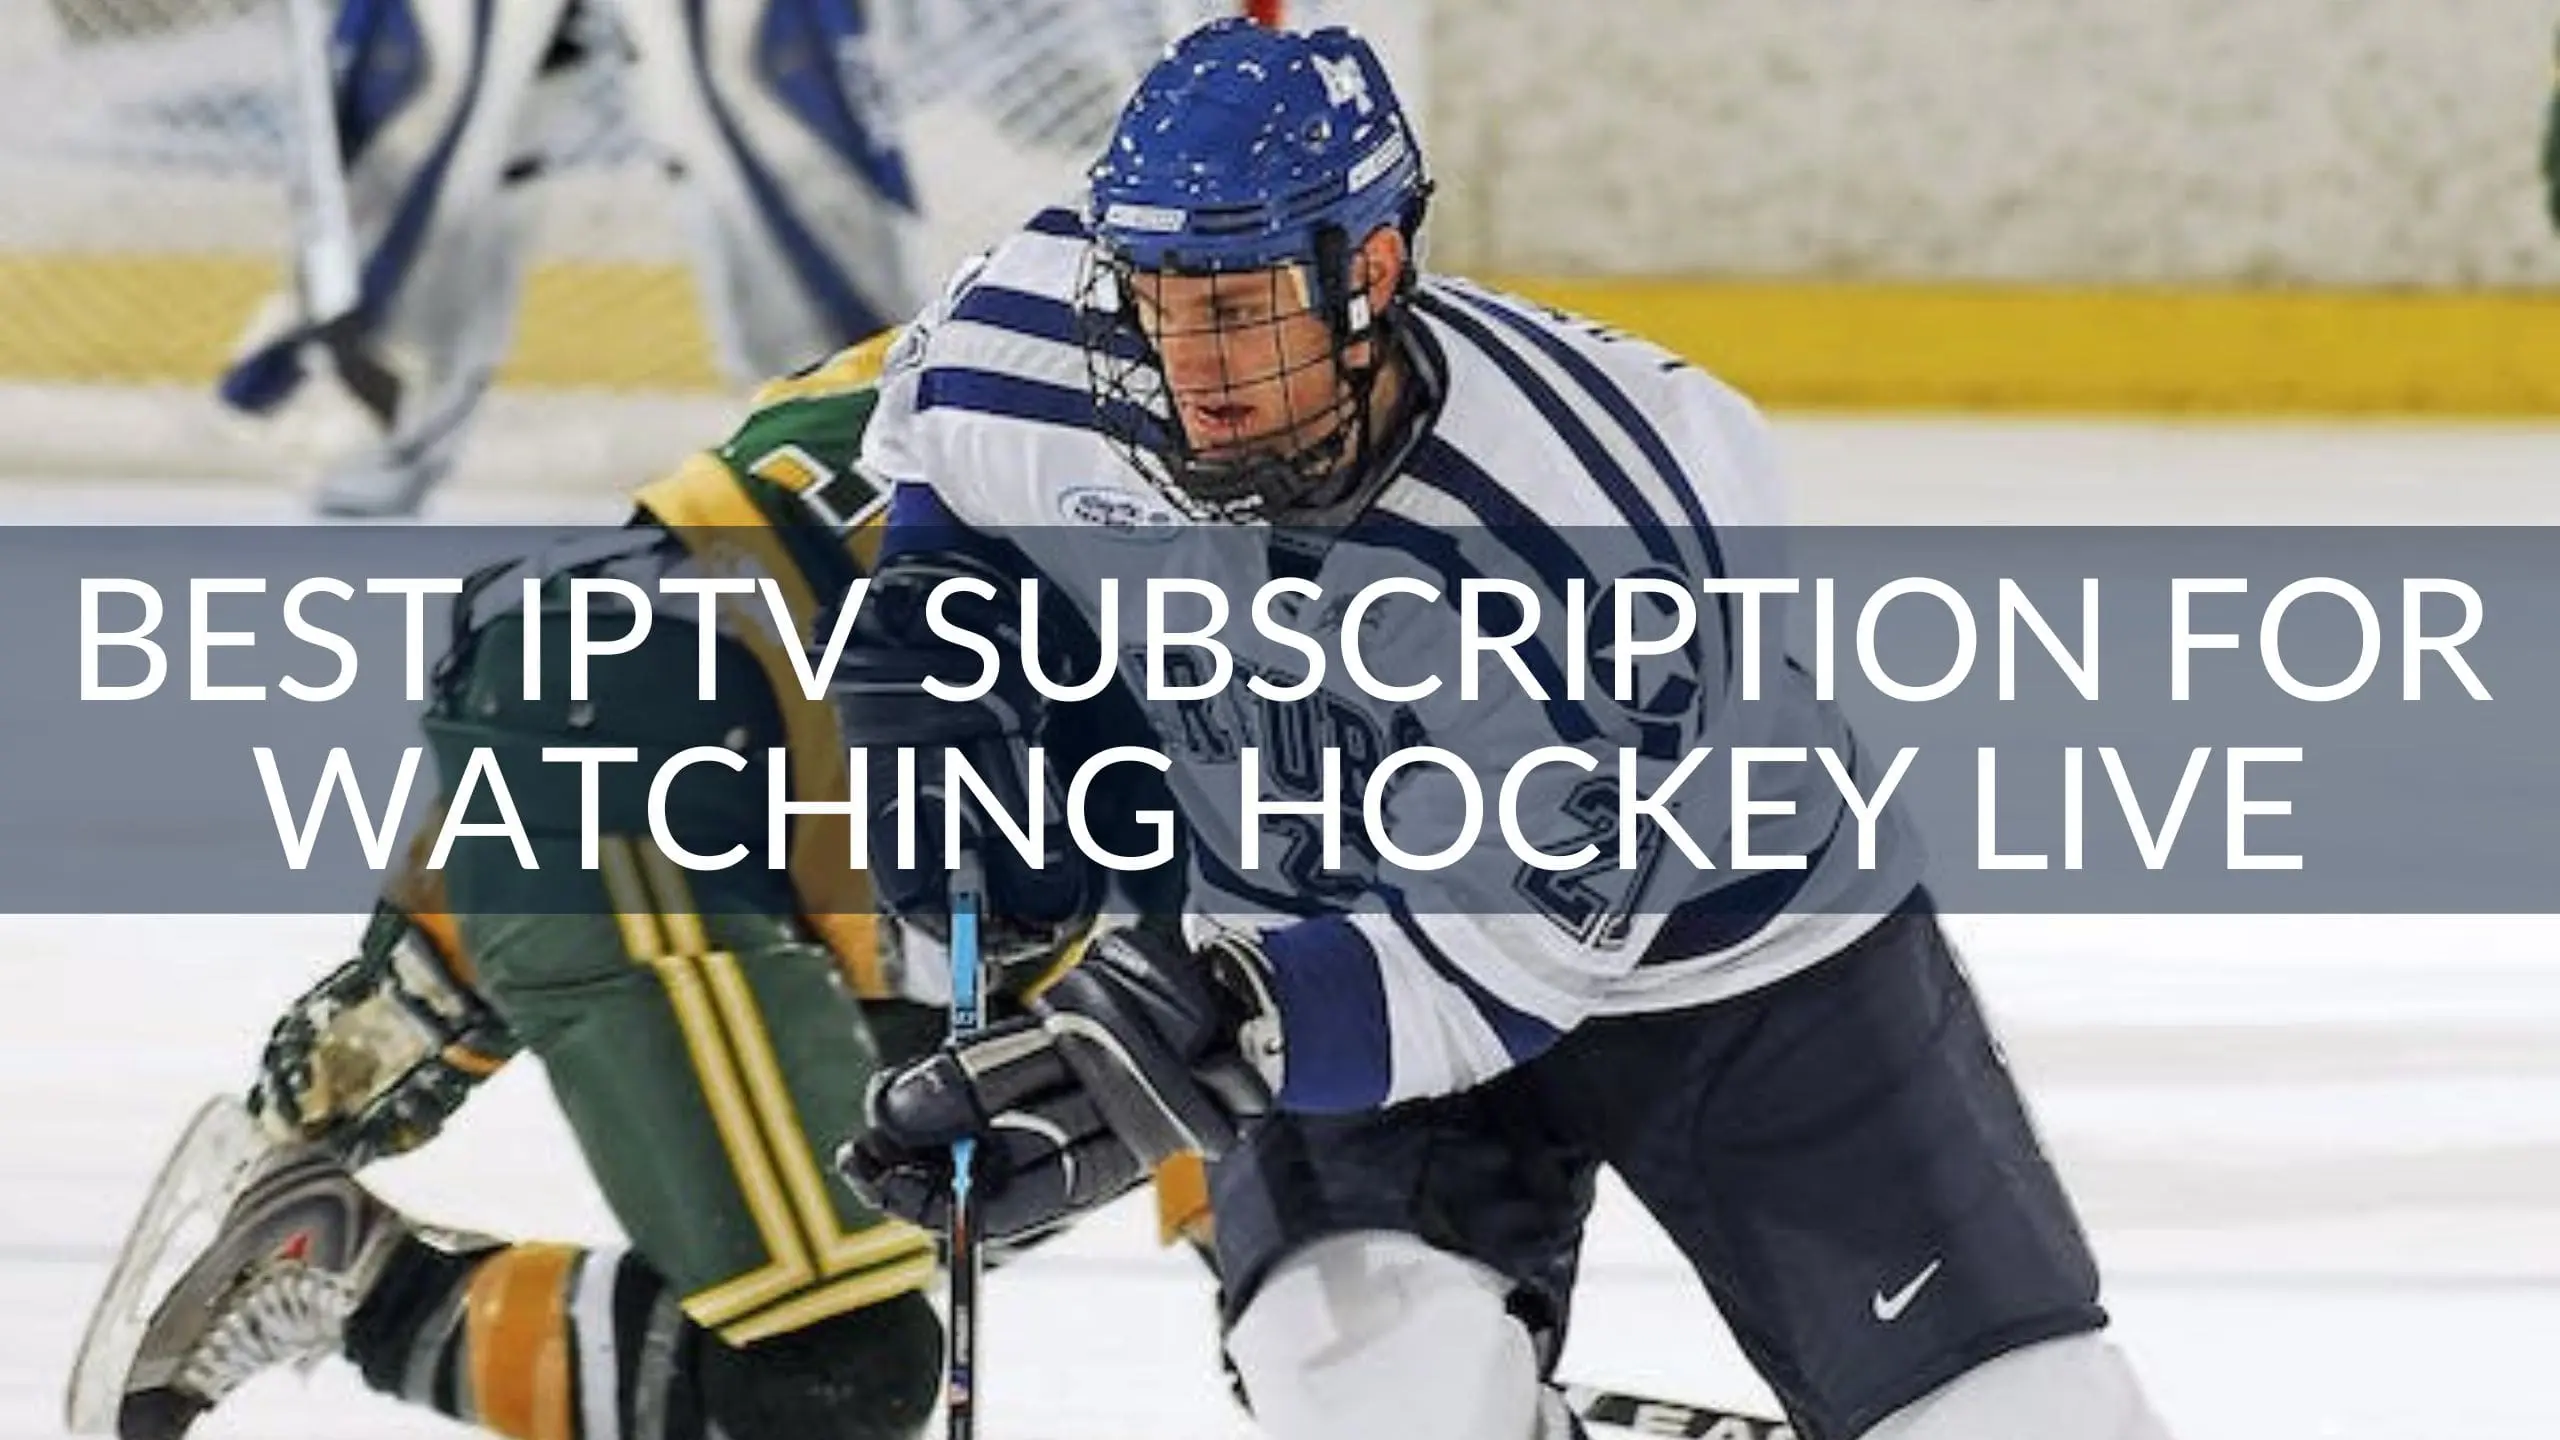 Best IPTV Subscription for Watching Hockey Live